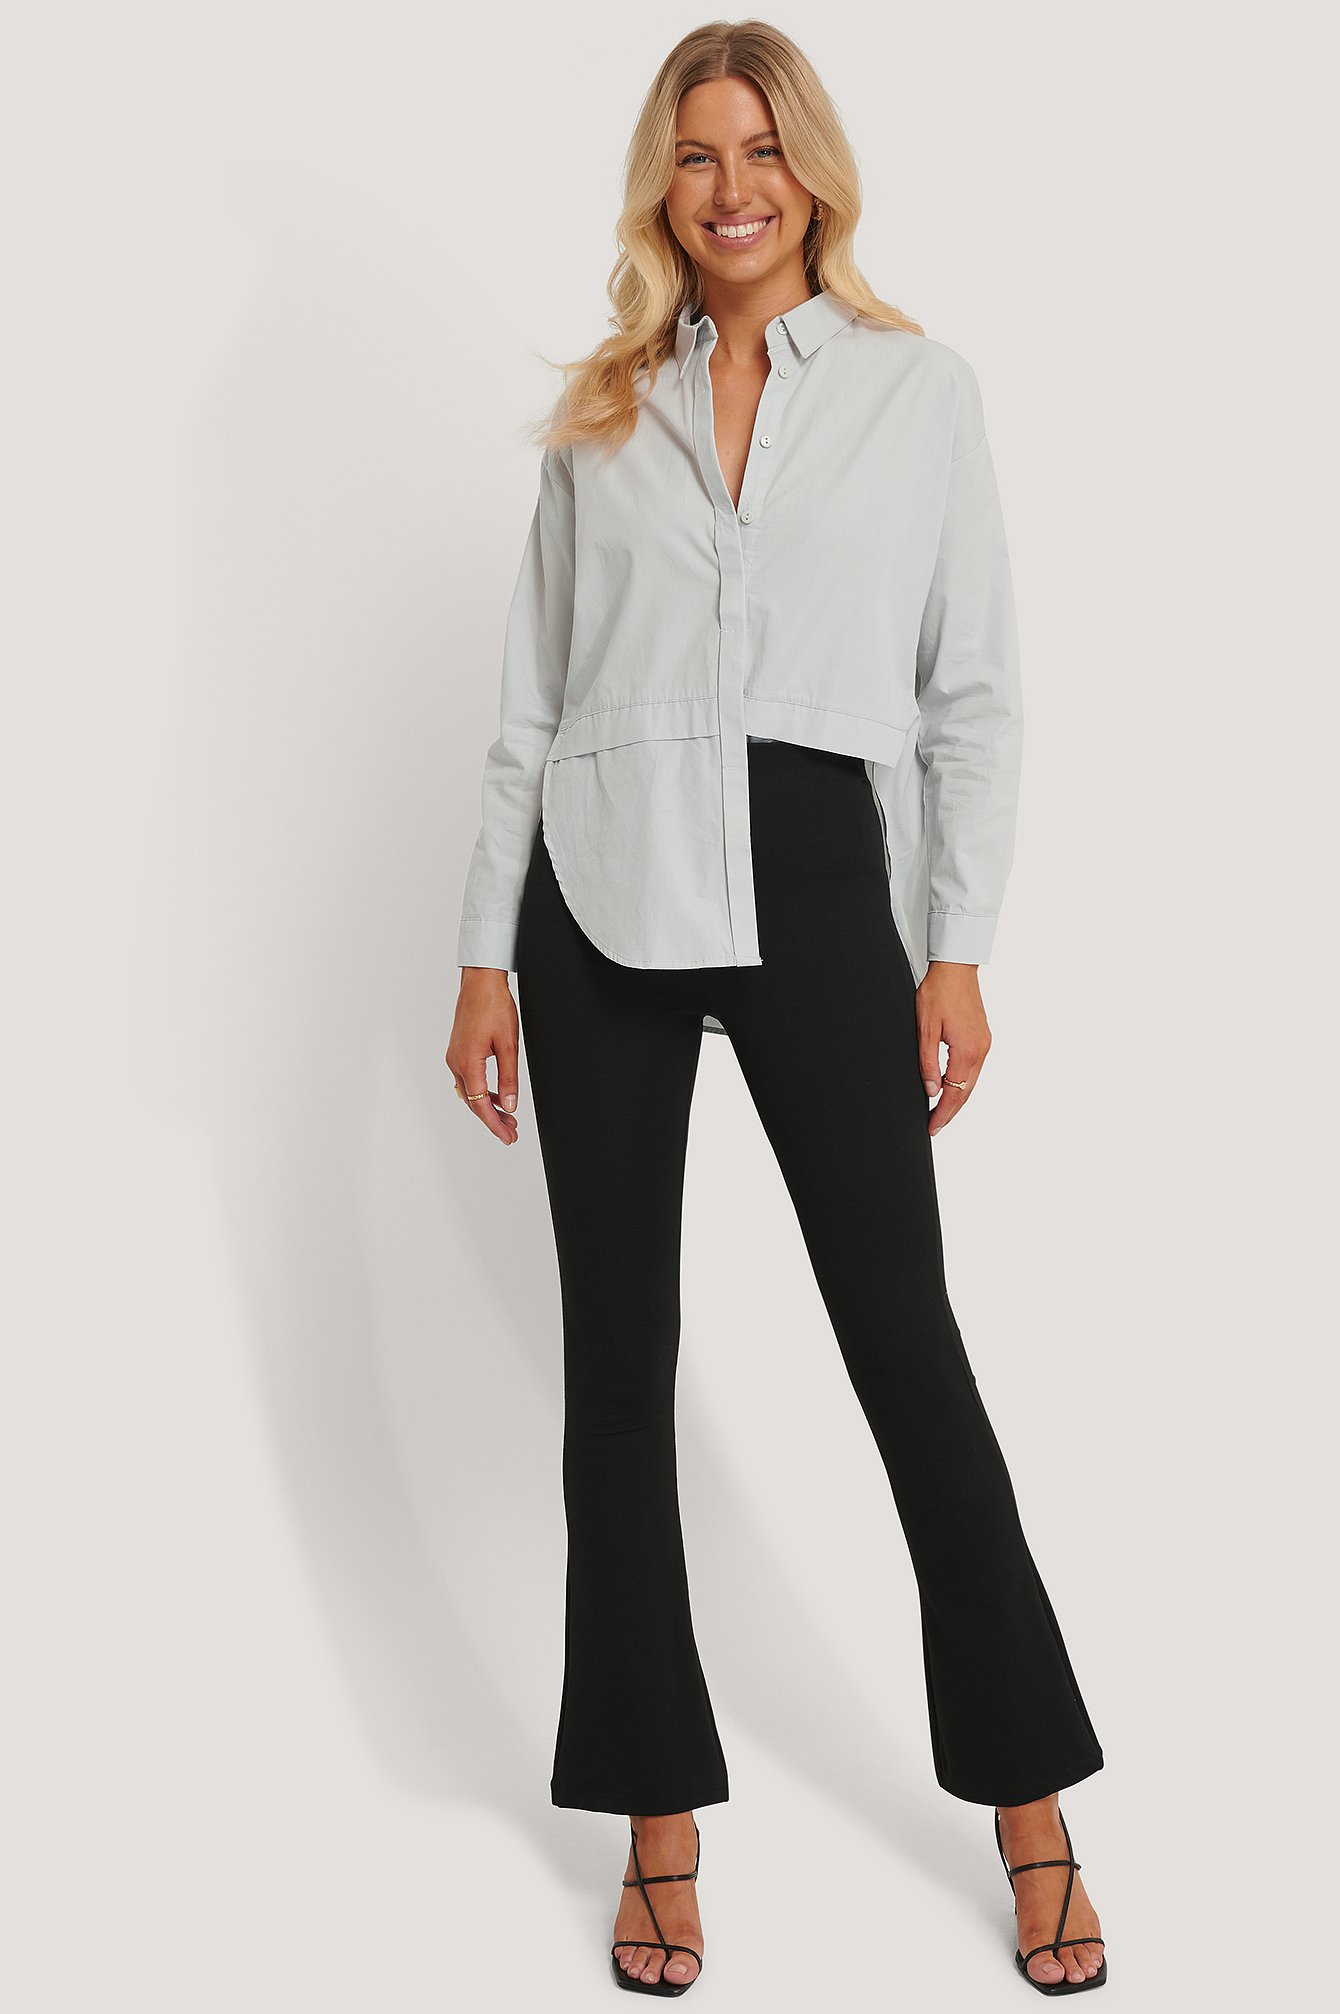 Buy Black Viscose Jersey Trousers from the Pineapple online store